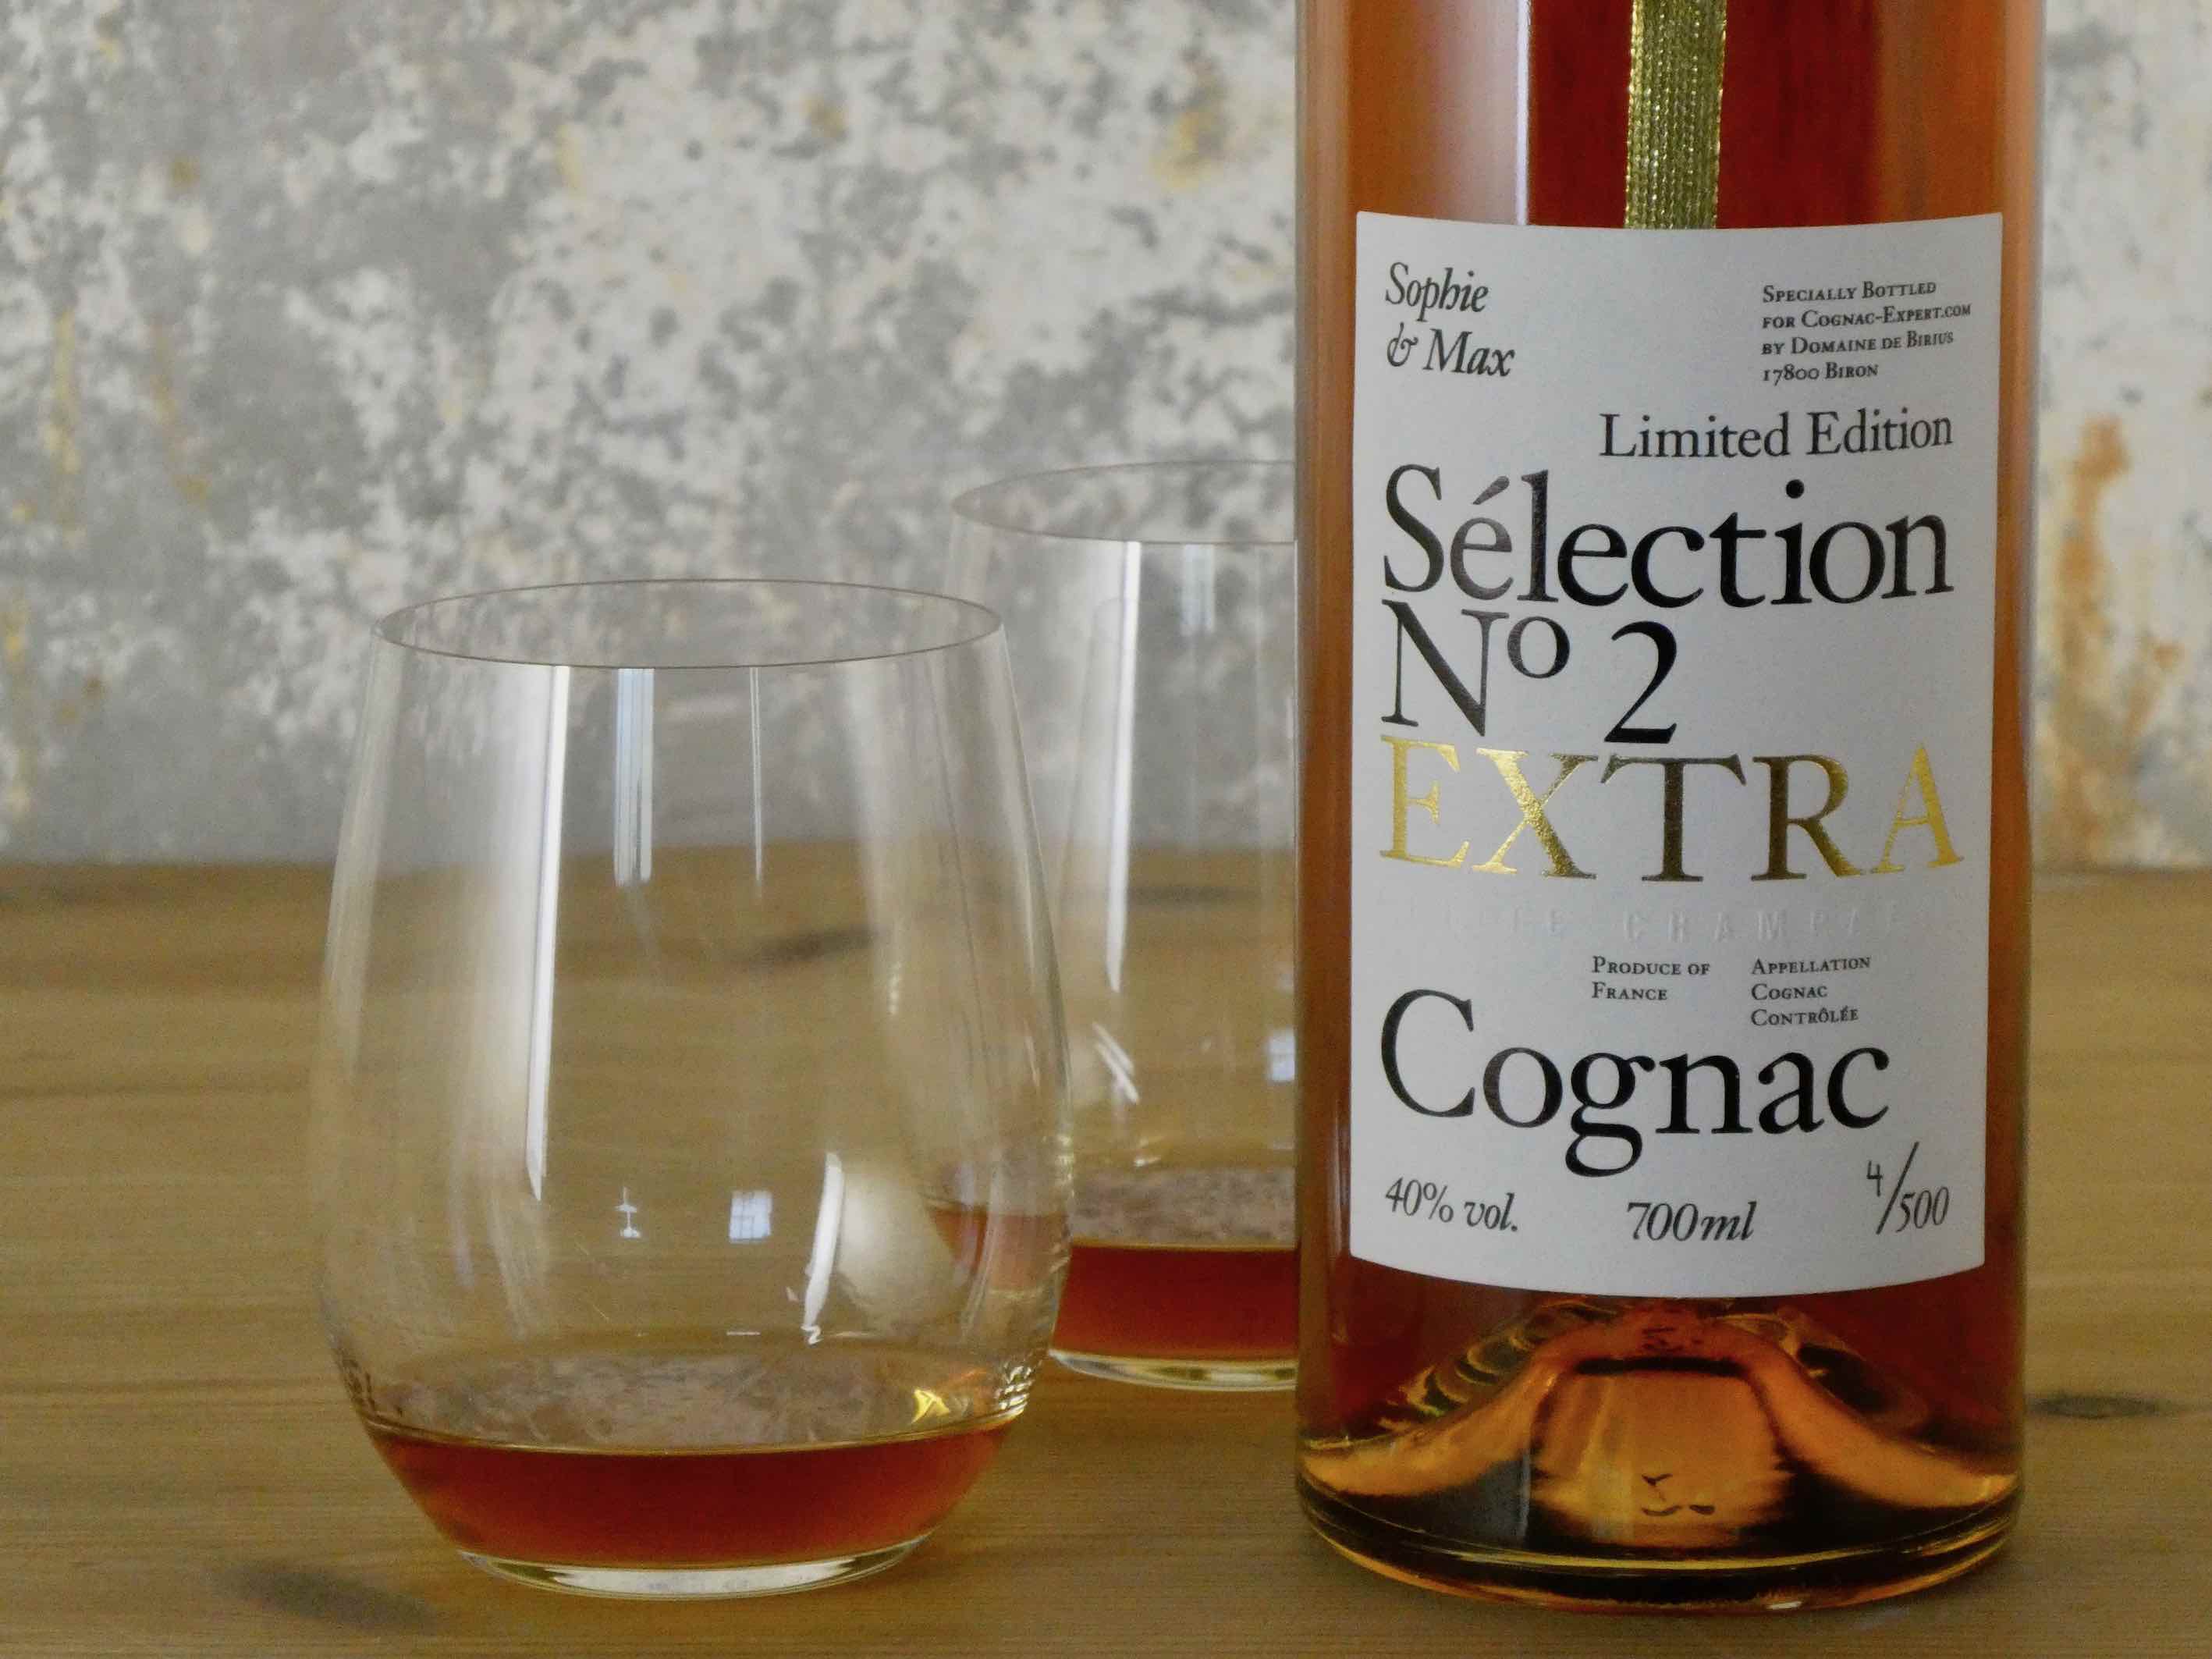 Launch Day: Sophie & Max Sélection N° 2 Limited Edition Cognac